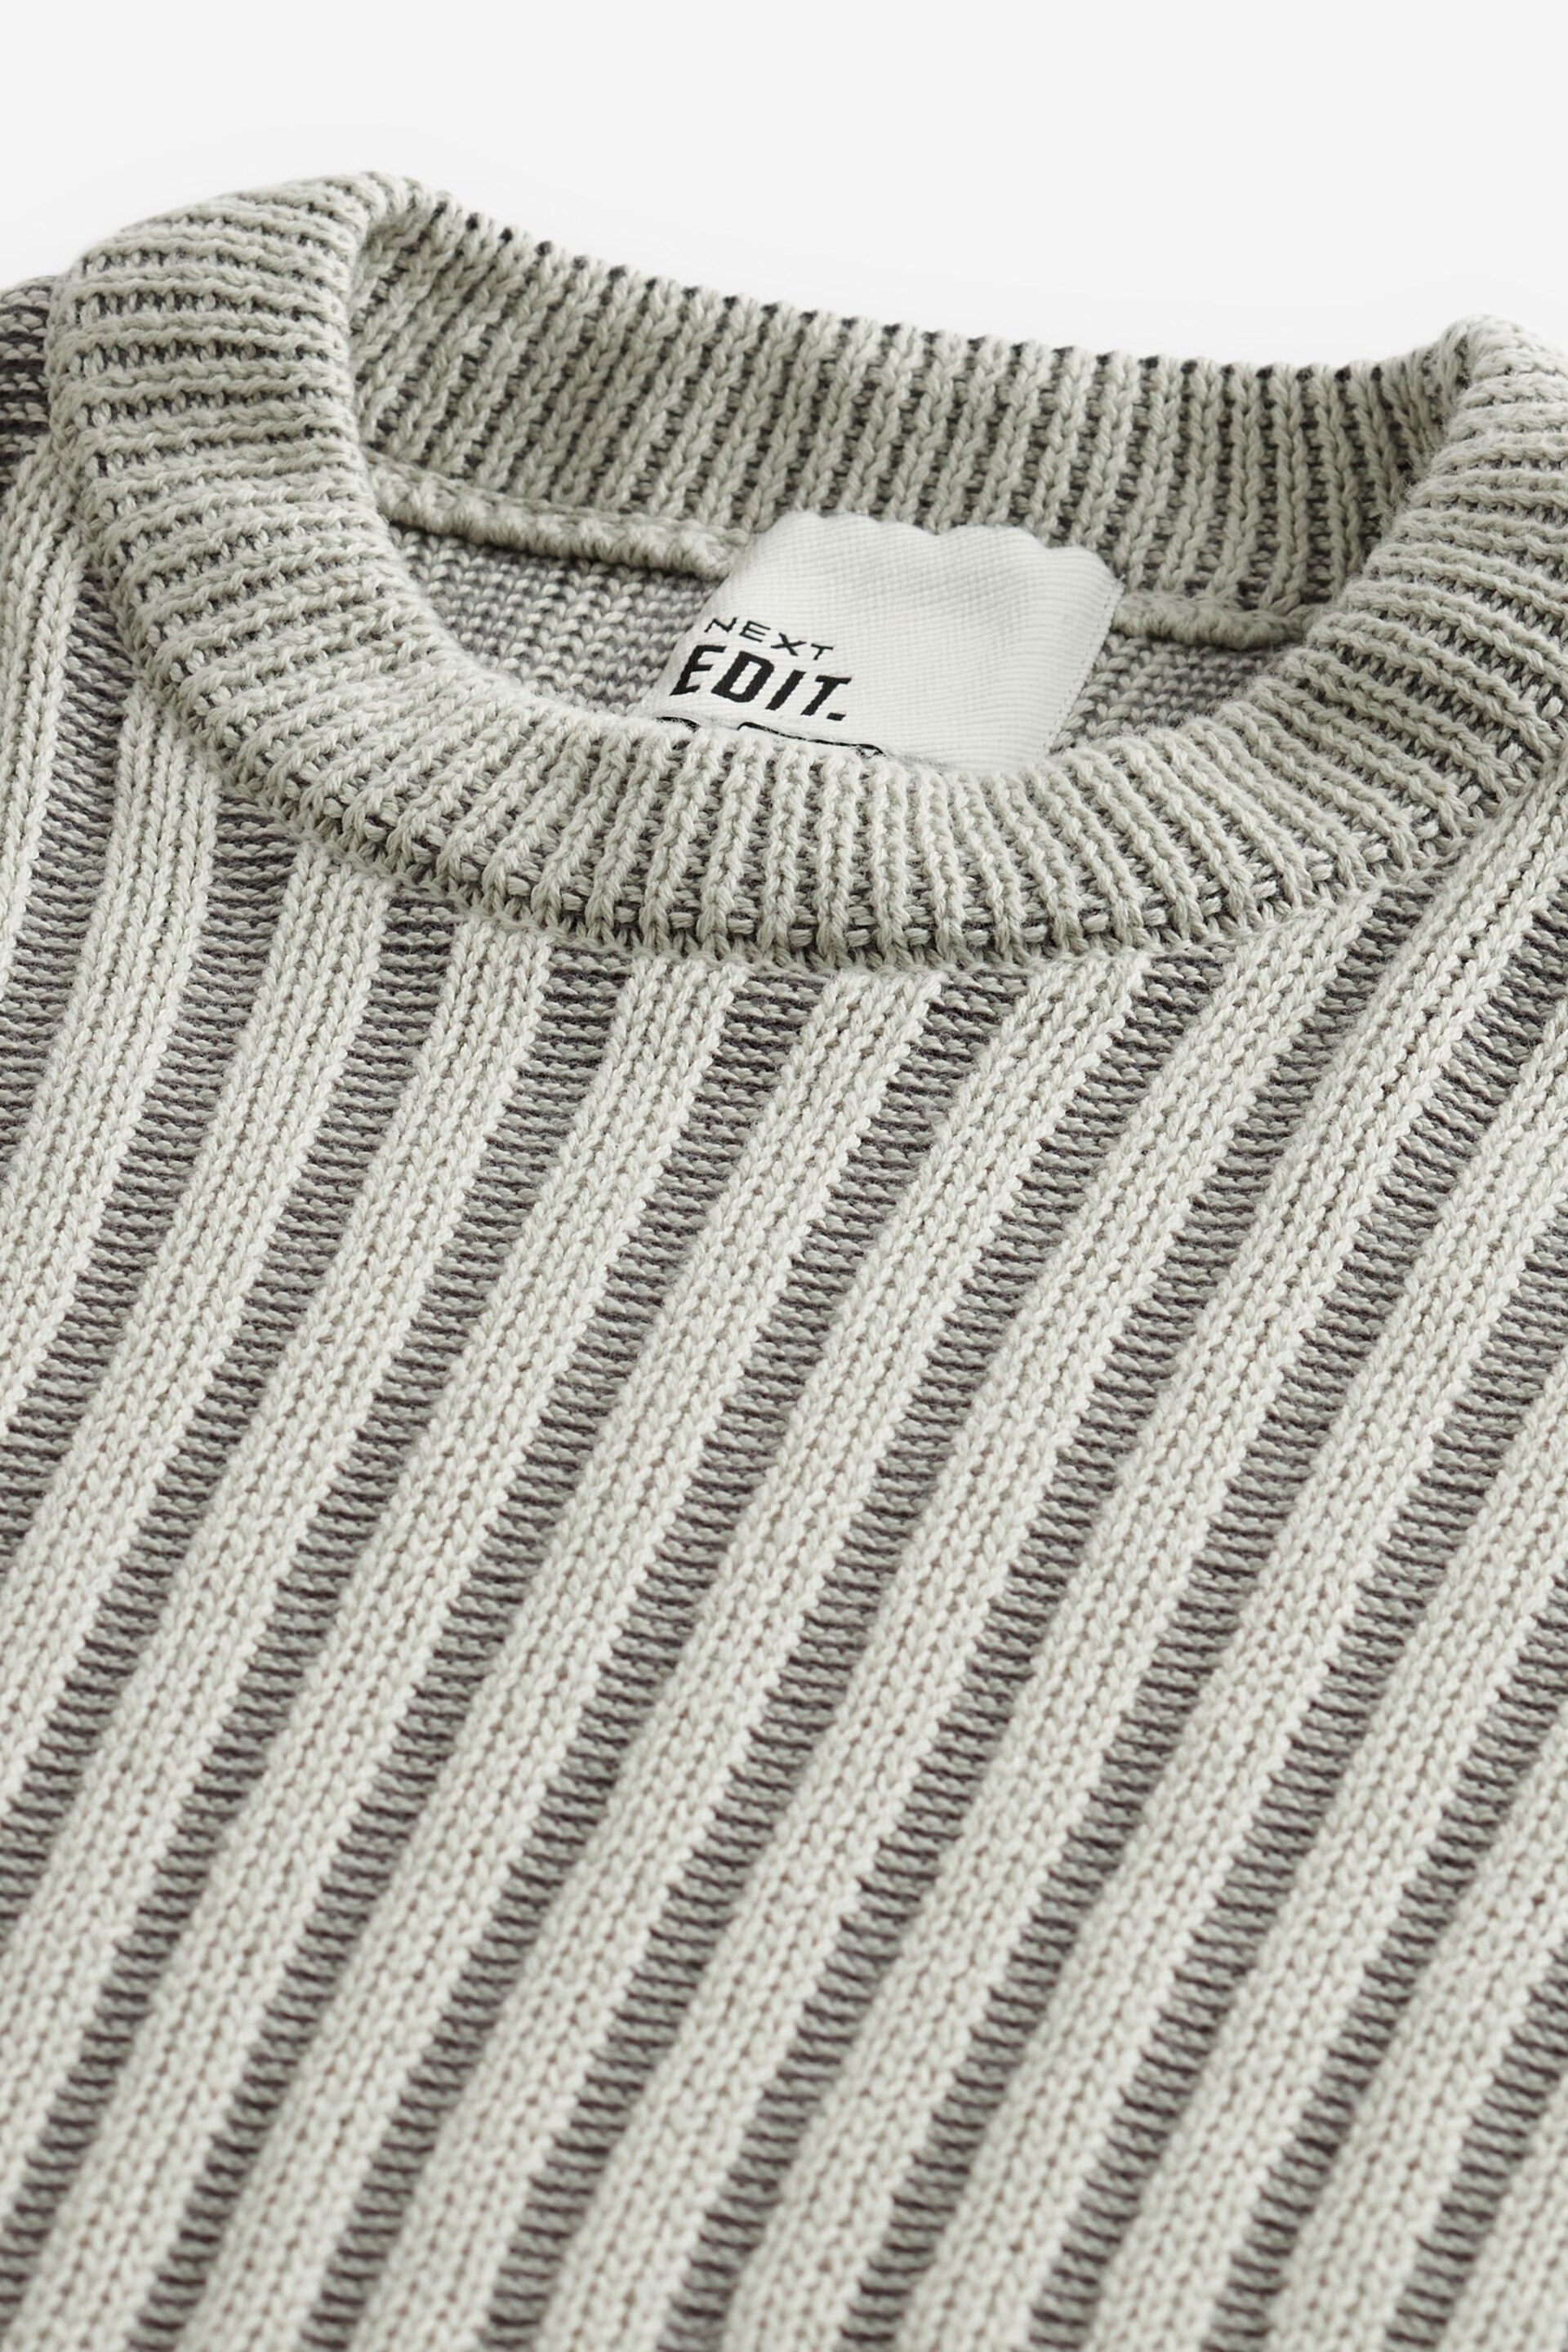 Grey EDIT Relaxed Short Sleeve Knitted Crew Jumper - Image 6 of 7